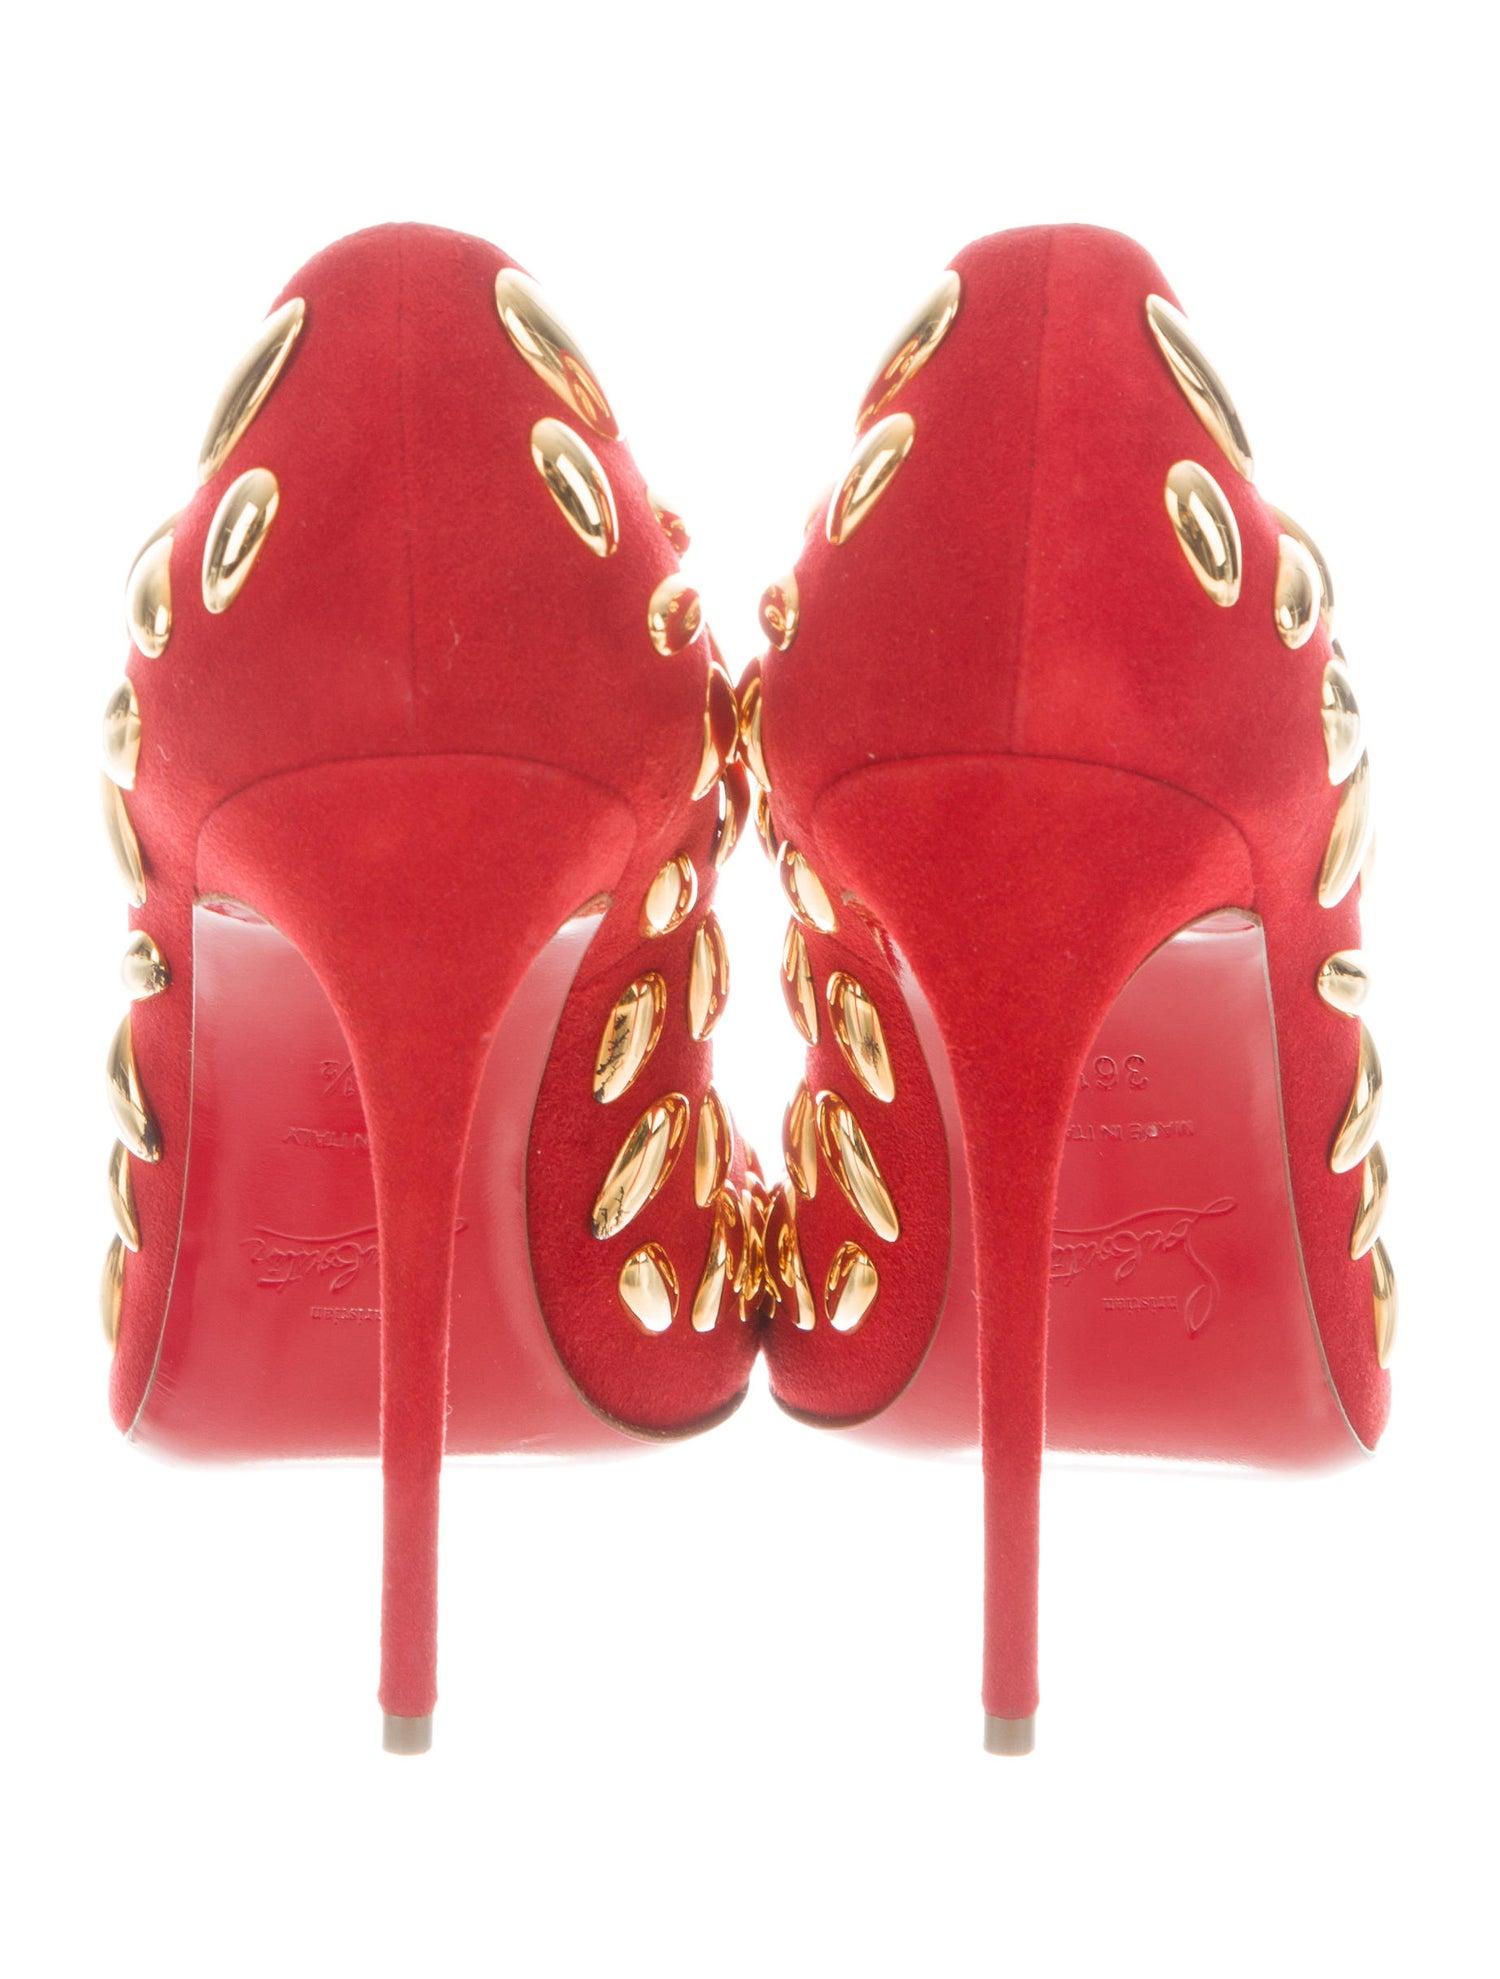 Women's Christian Louboutin NEW Red Suede Gold Metal Evening Heels Pumps